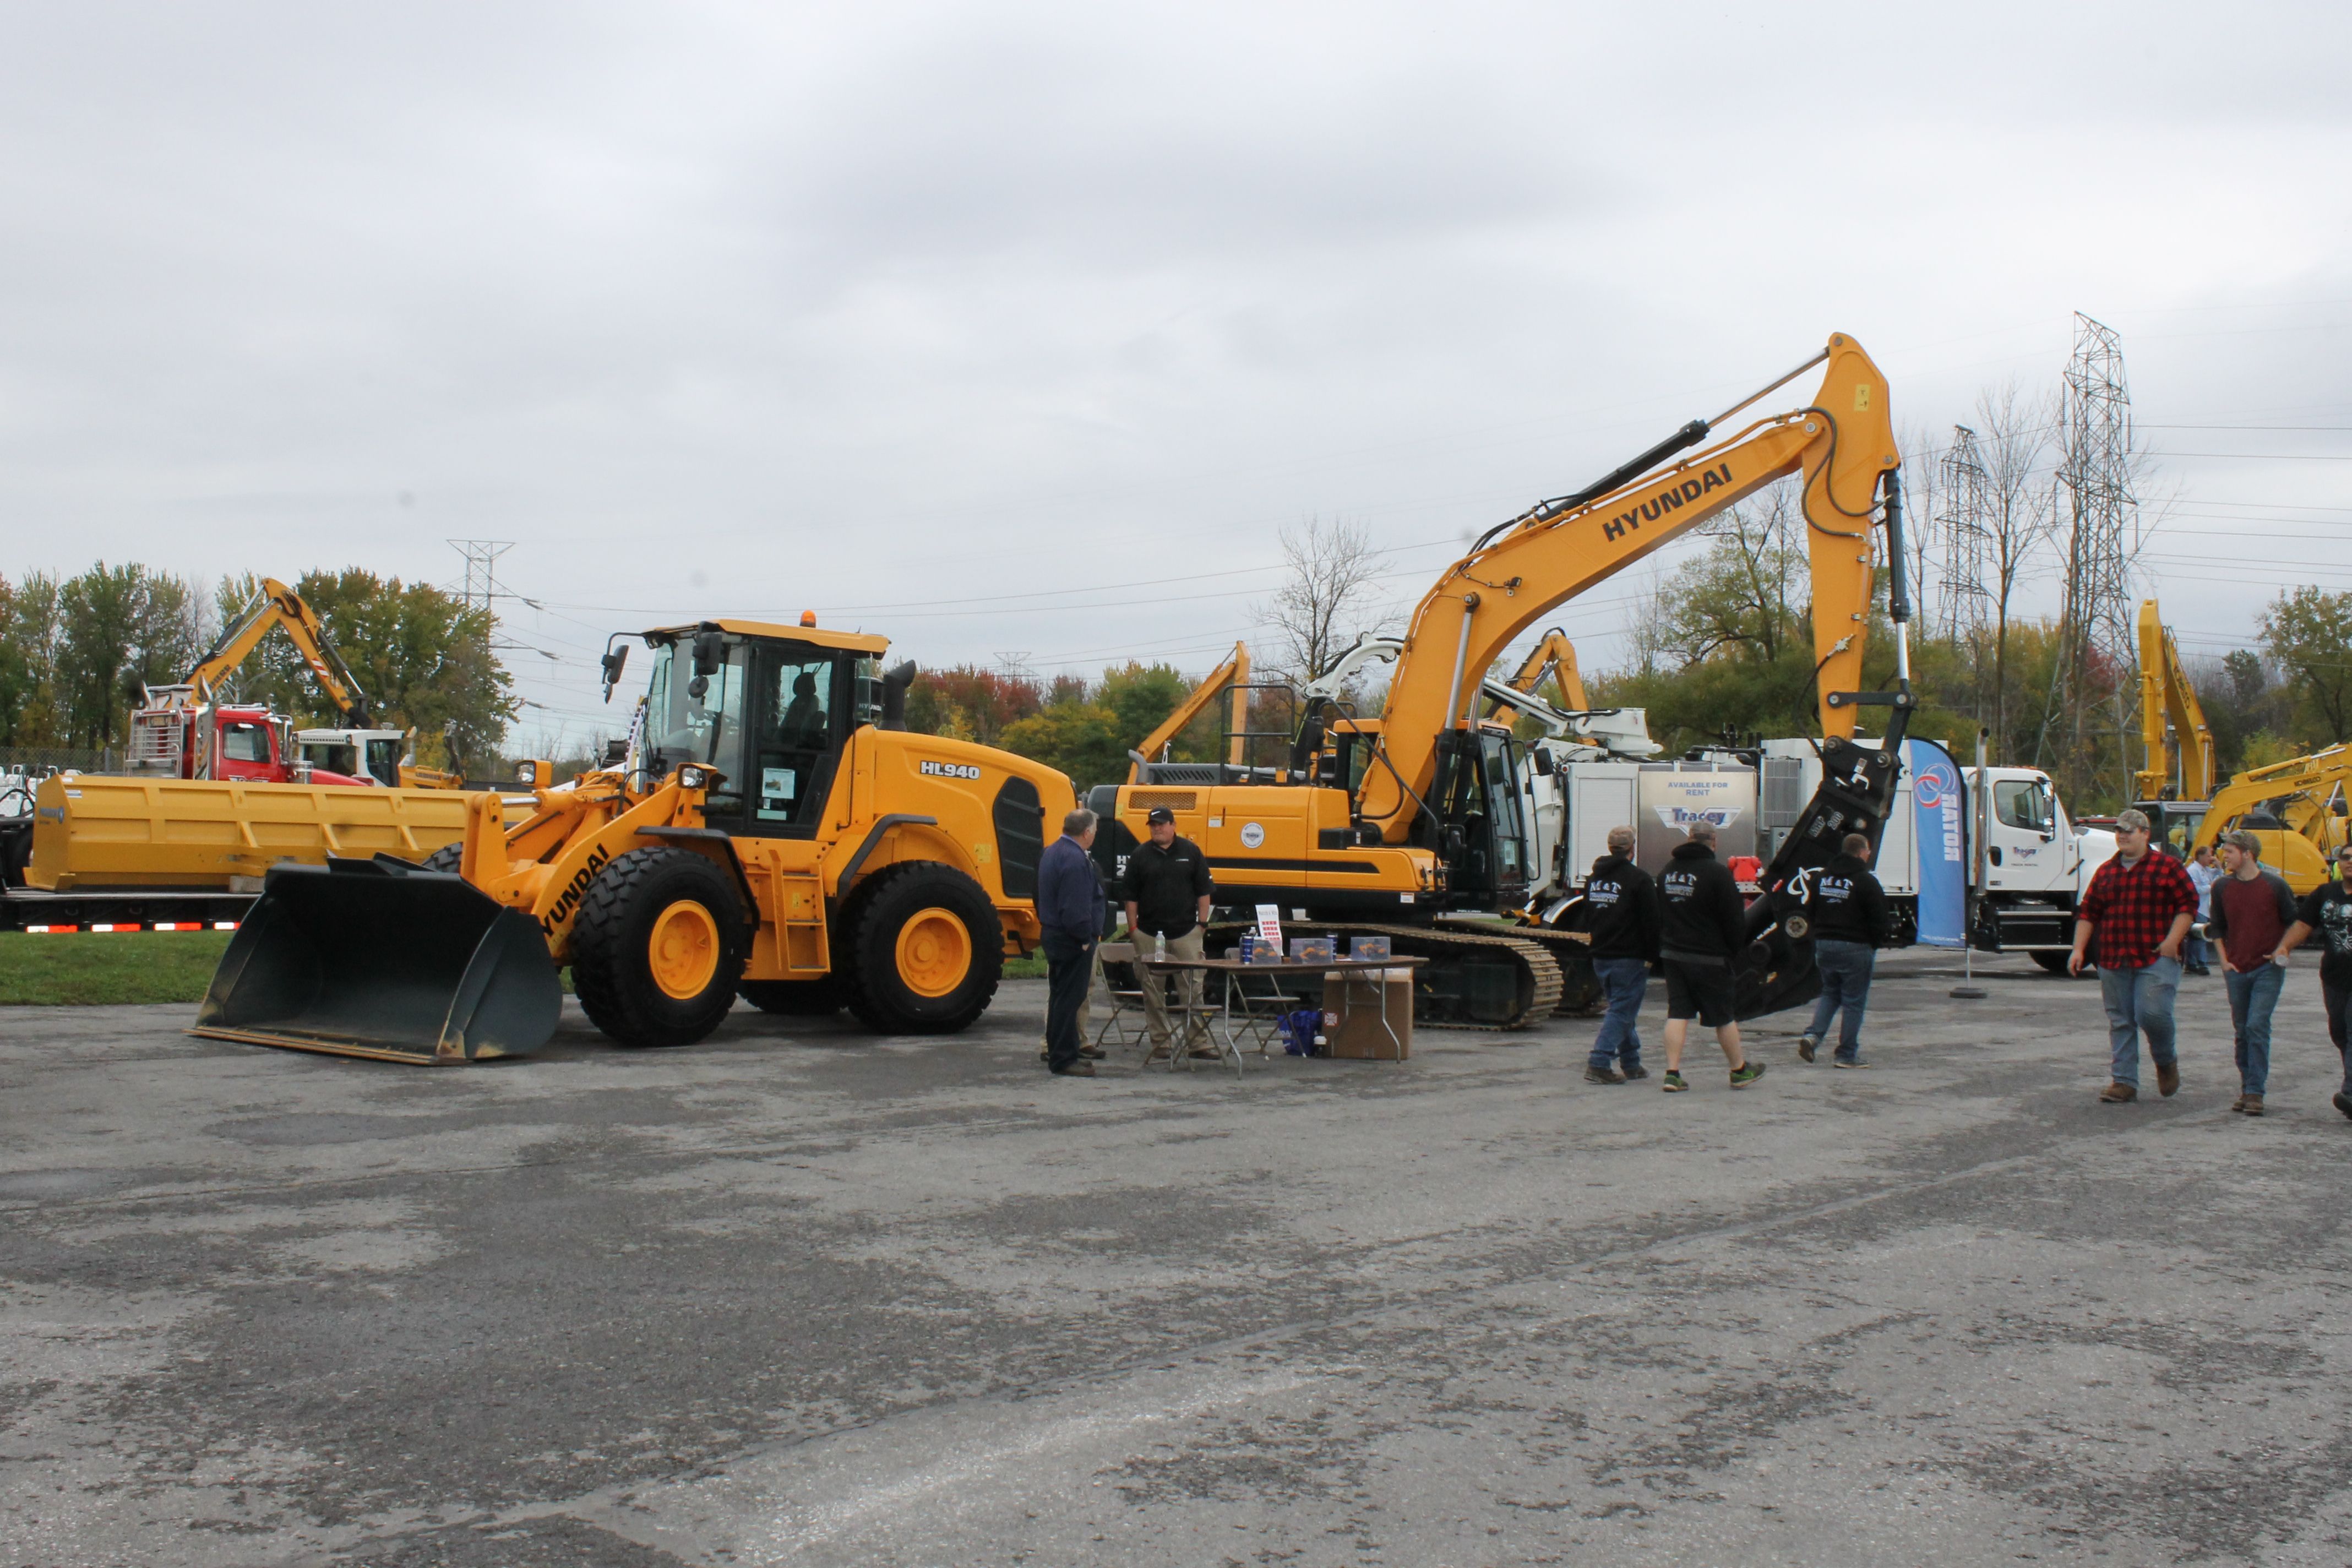 Hyundai Dealer Tracey Road Equipment Open House Event, October 10th, 2019